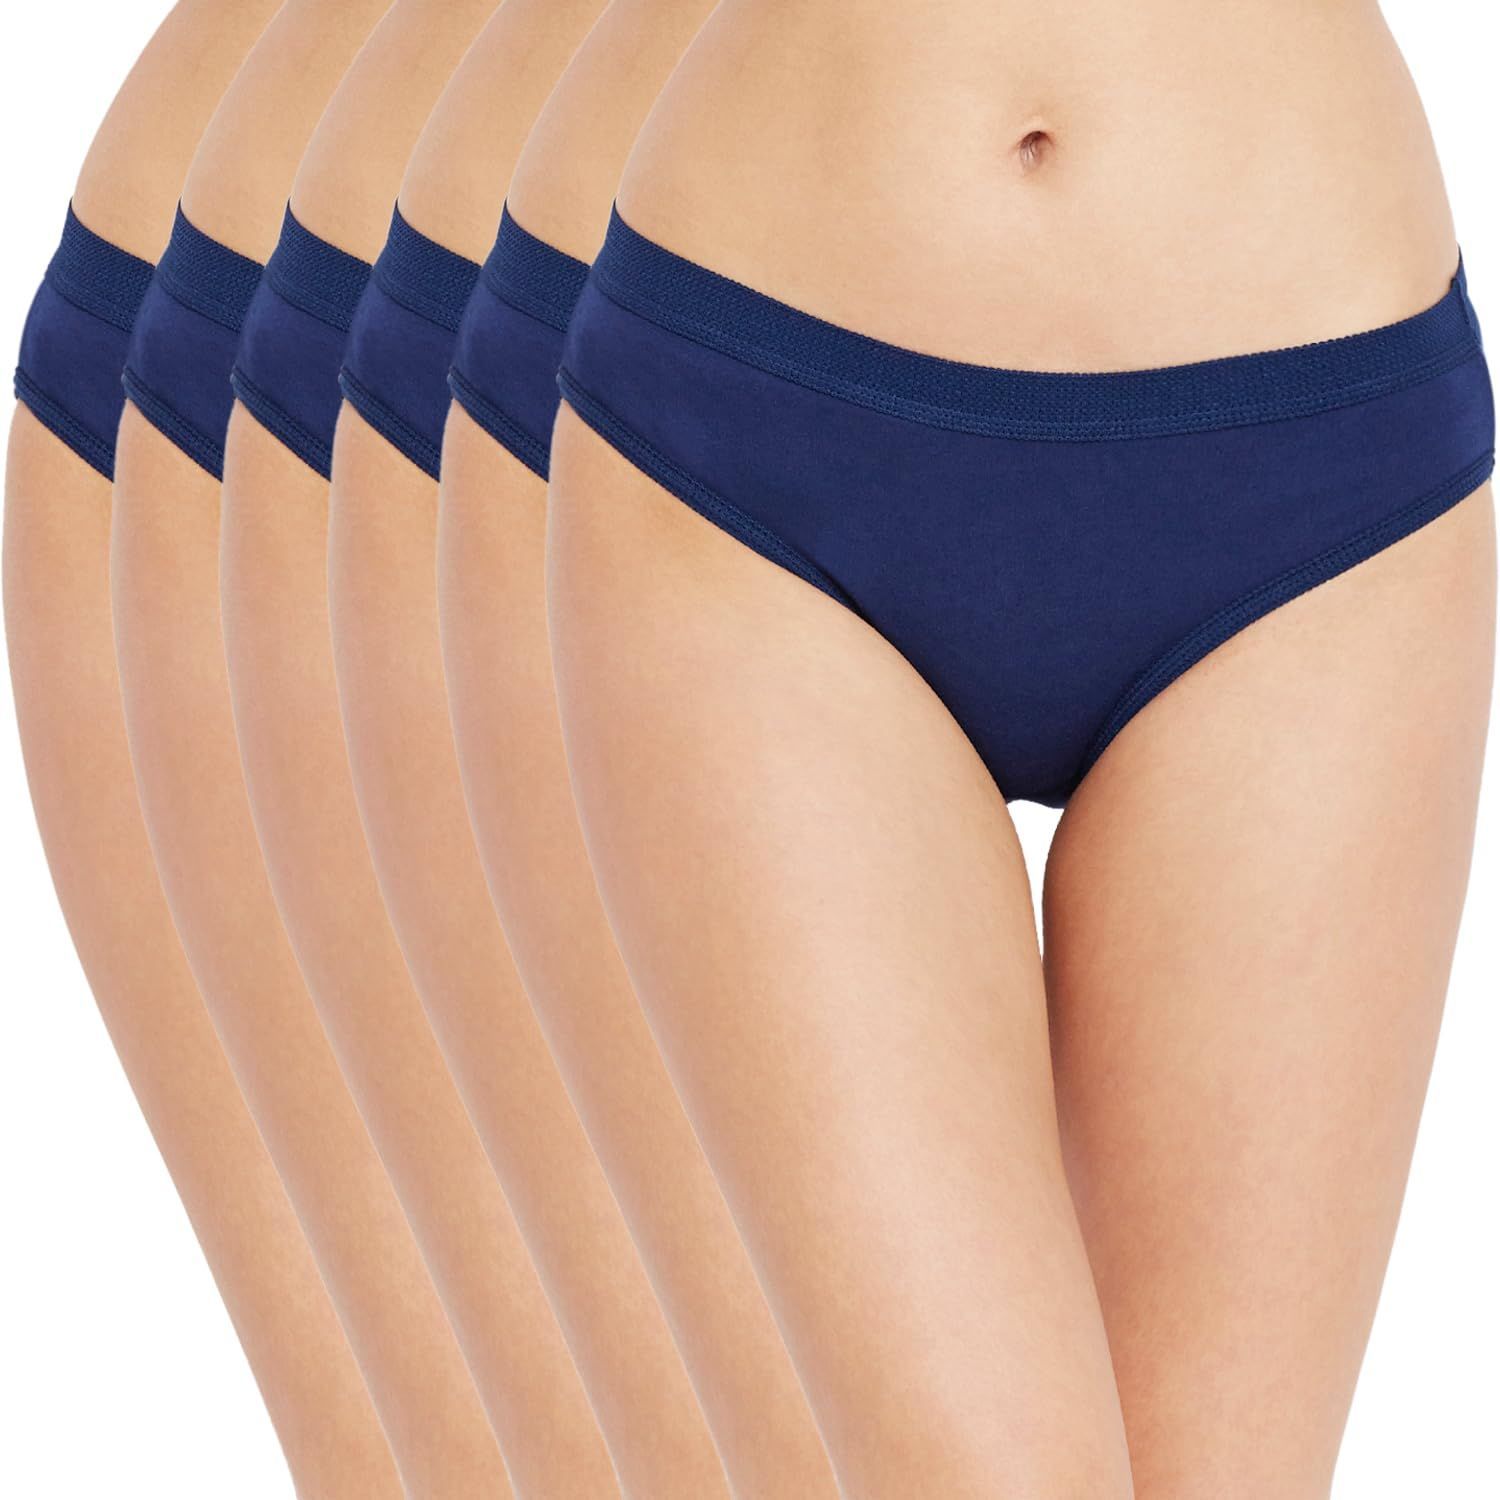 Buy BODYCARE Women's Cotton High Cut Briefs (Pack of 3) Assorted_L at